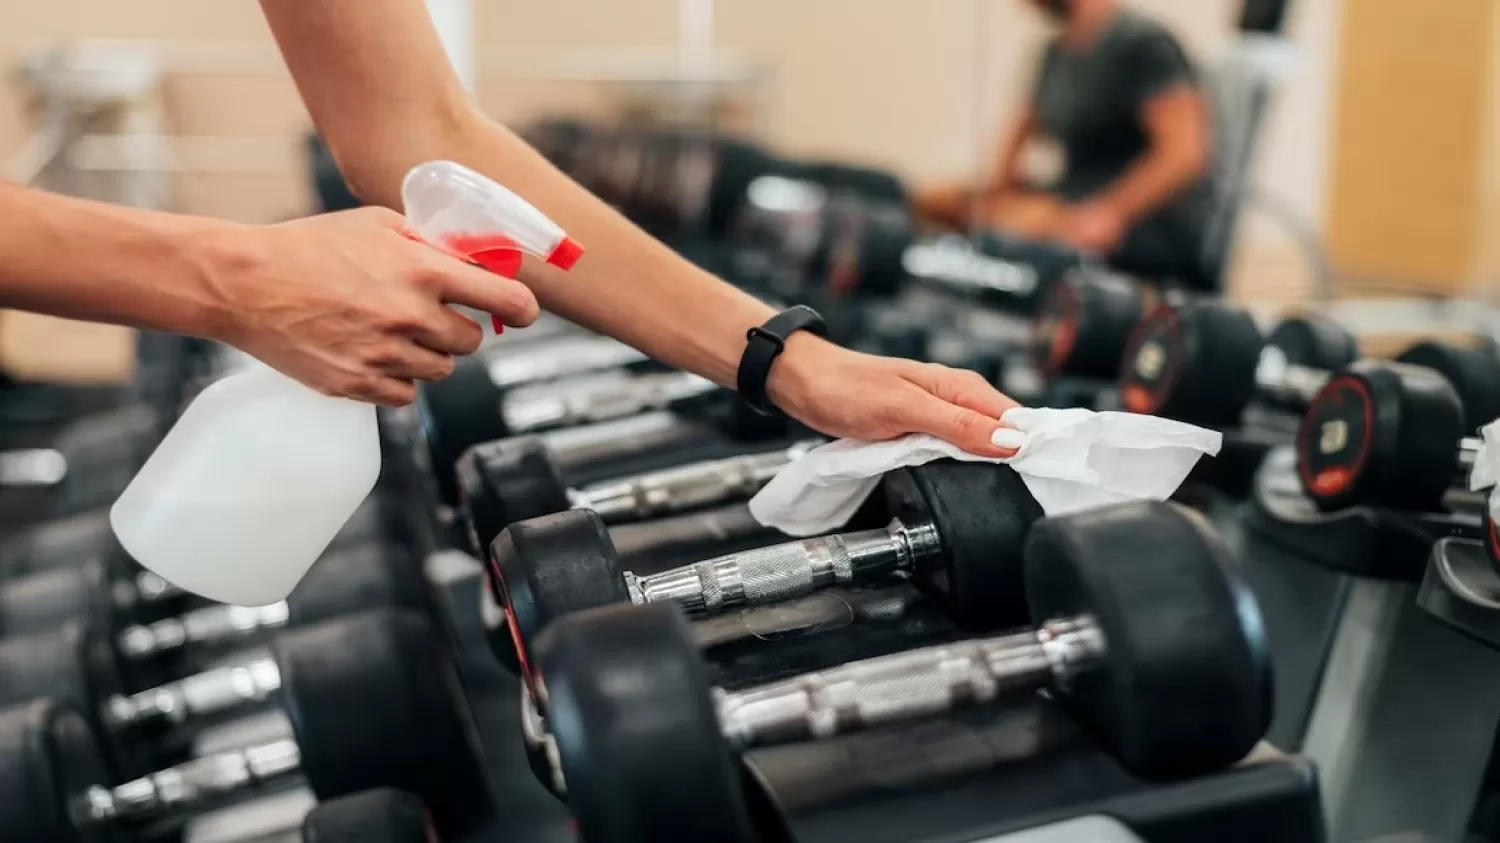 The Importance of Regular Maintenance for Fitness Equipment in Gyms